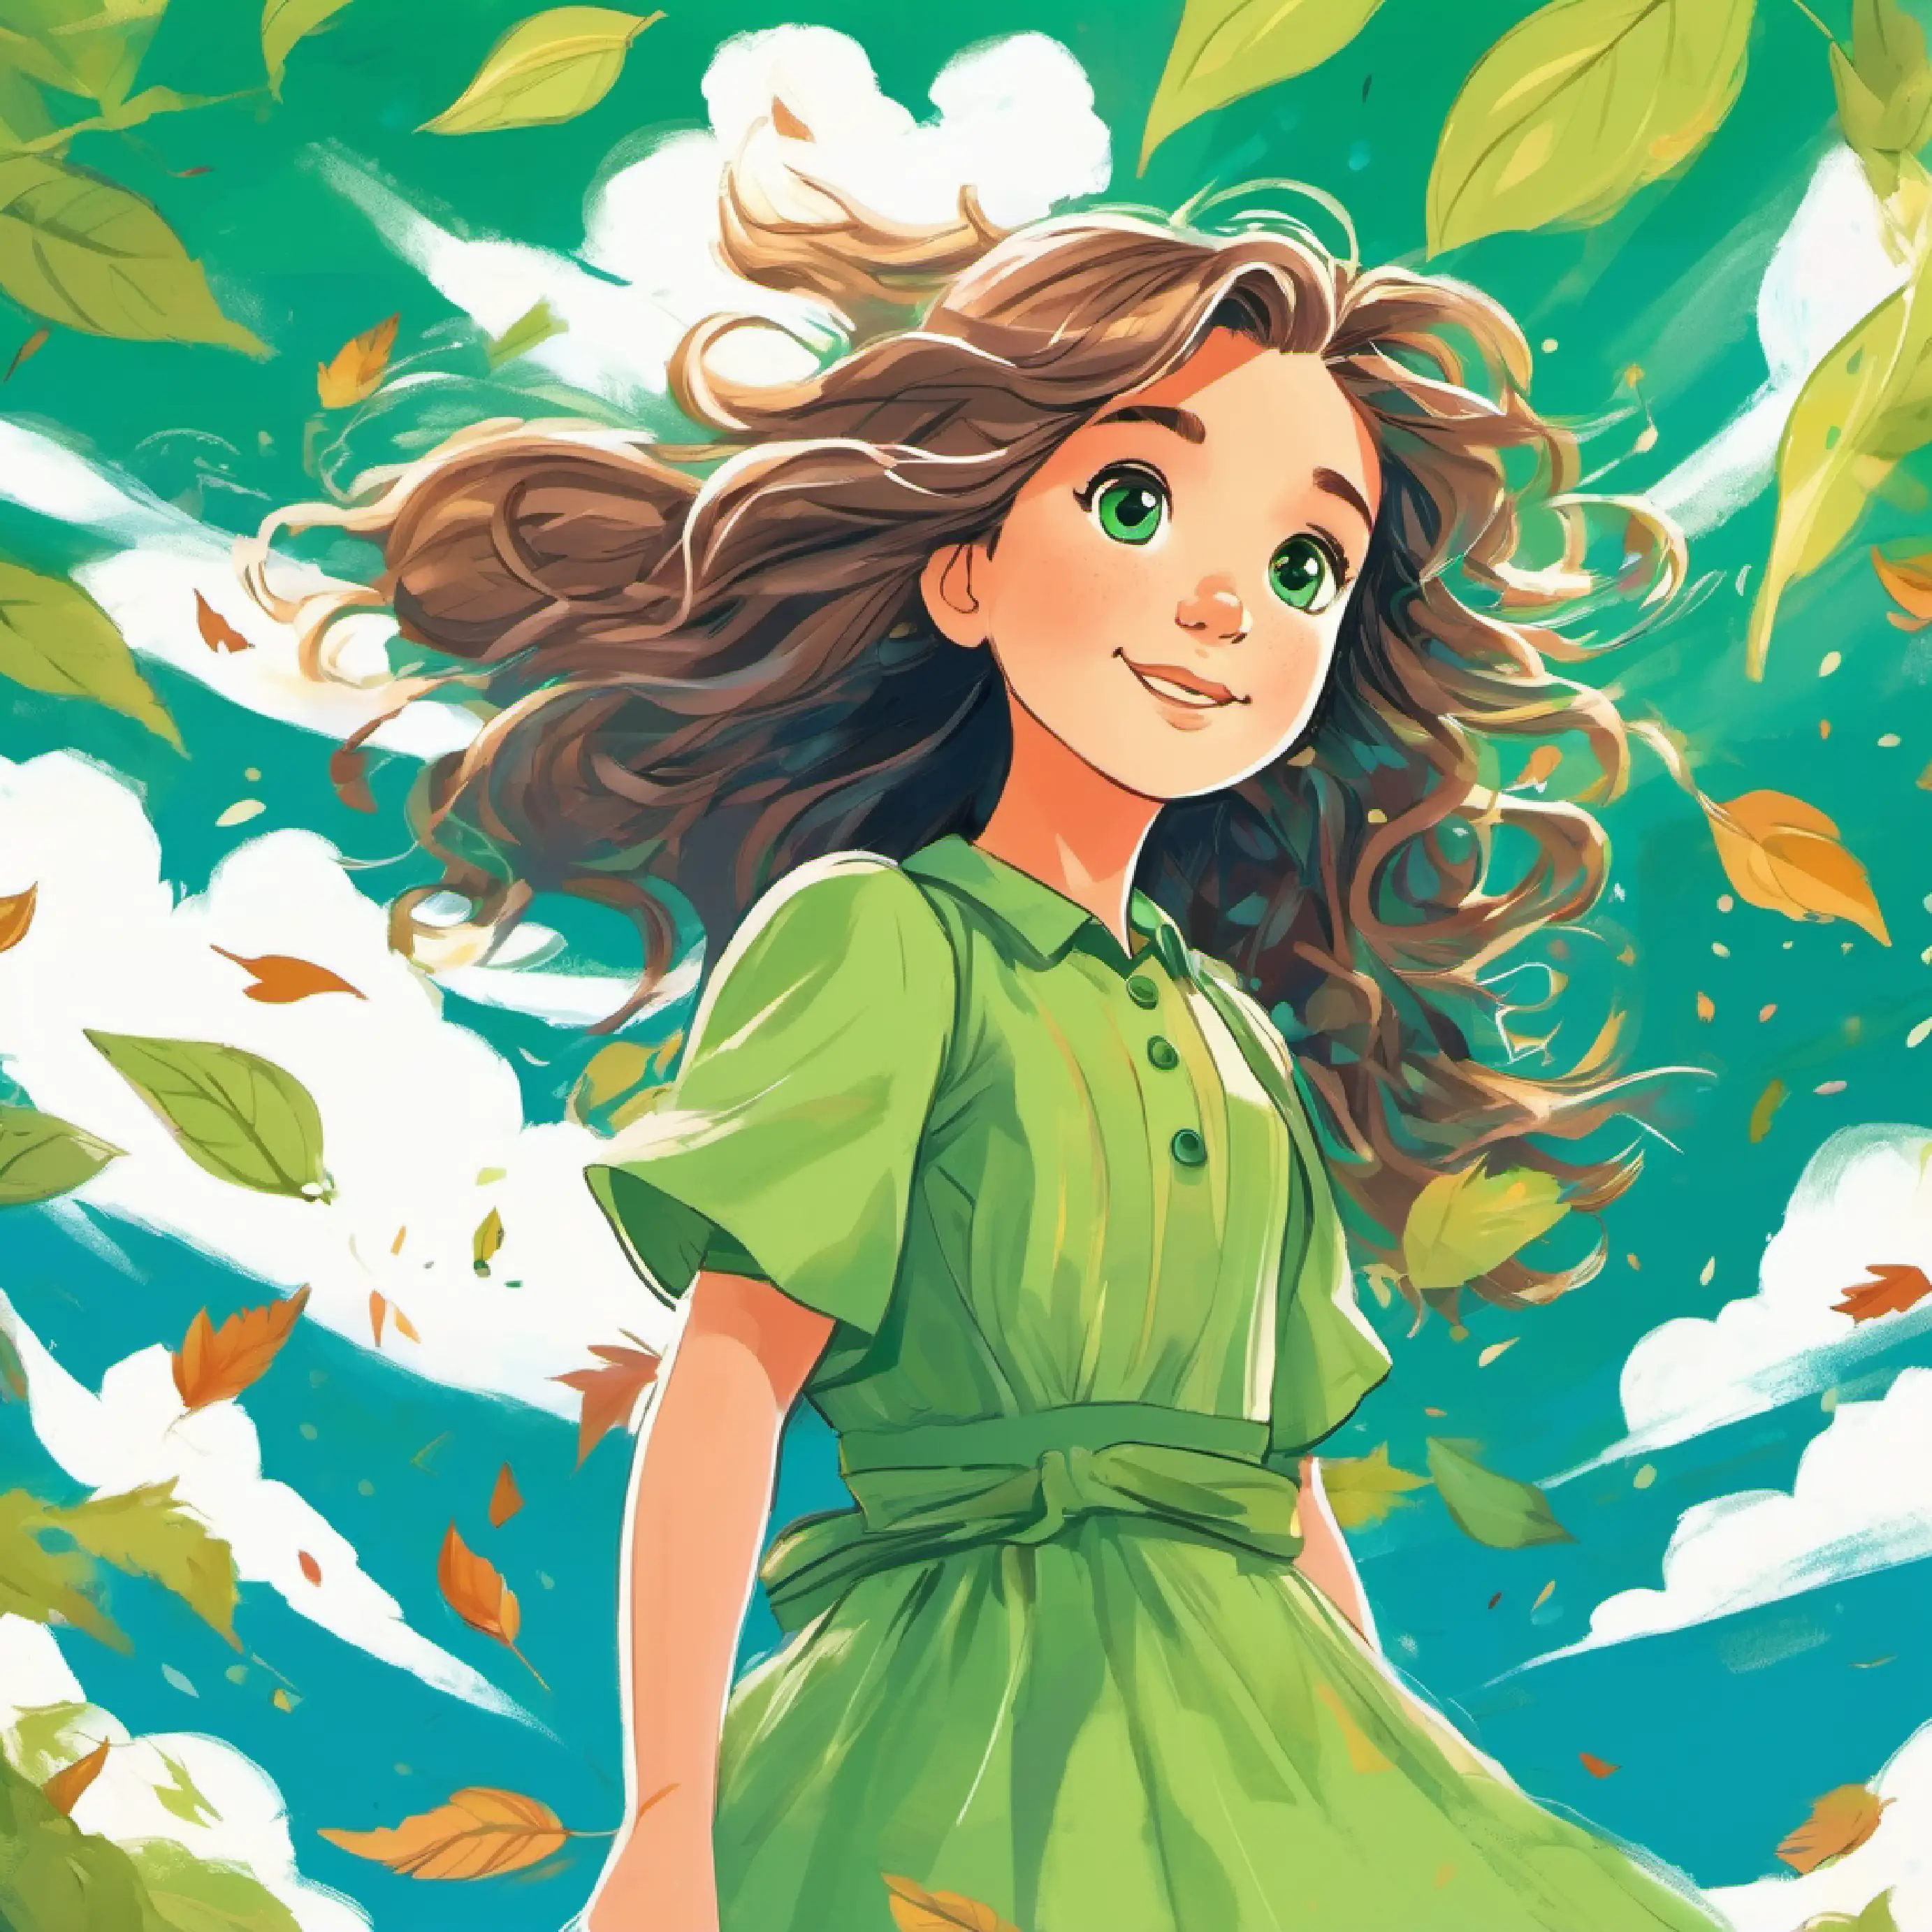 Leaves rustling around Girl with sunny hair, full of hope, bright blue eyes, wears a green dress as she feels encouraged by the wind.